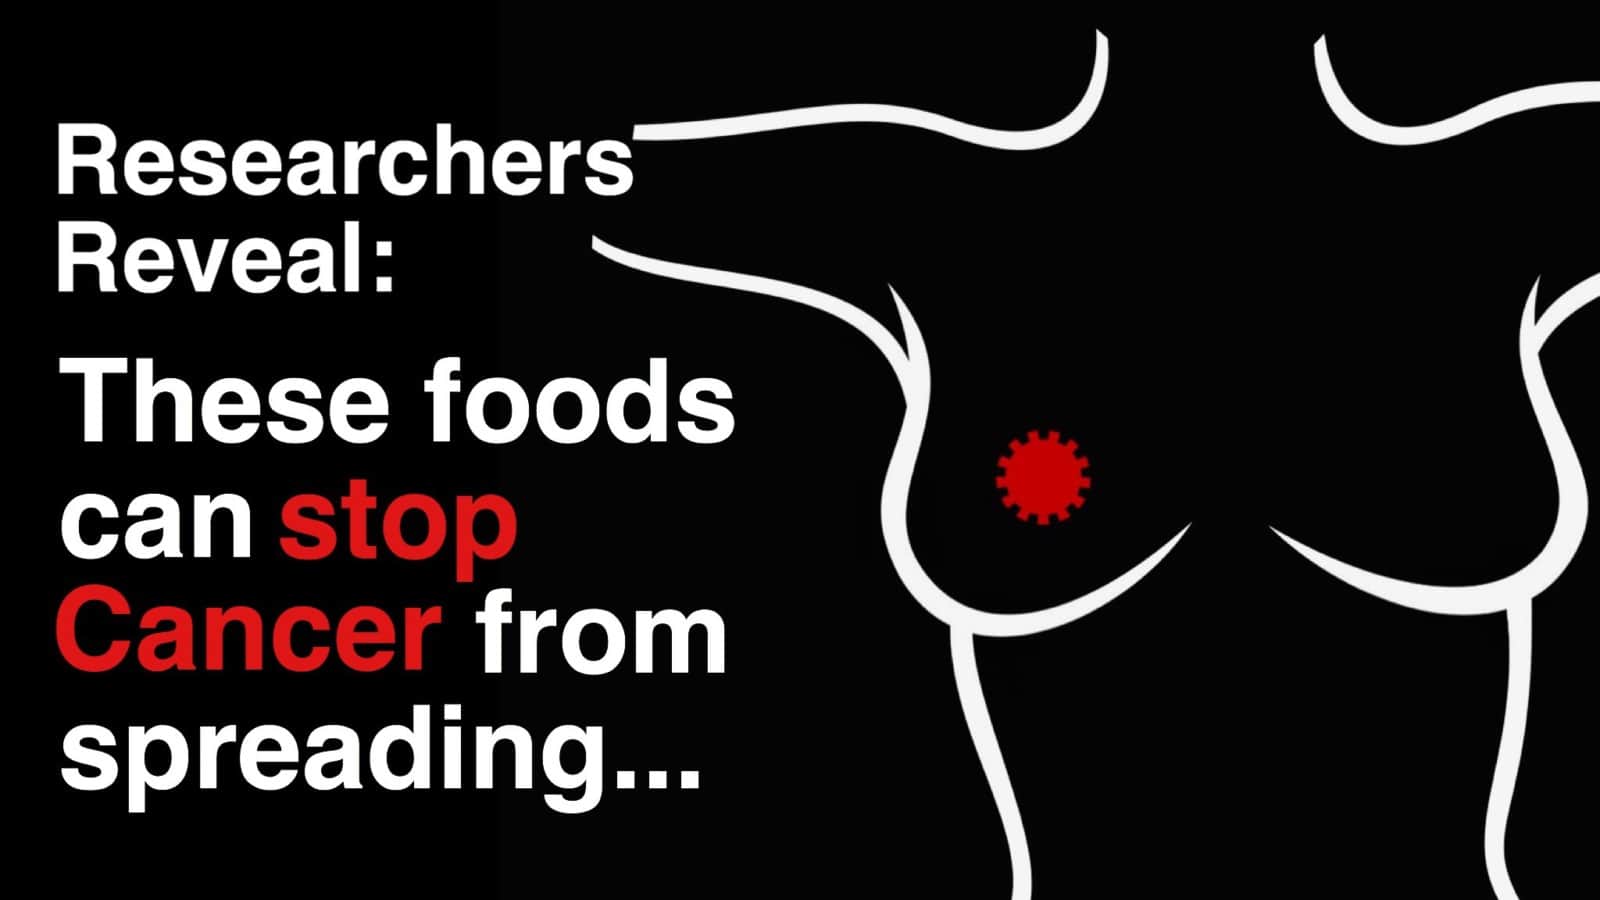 Researchers Reveal Foods That Can Stop Cancer From Spreading